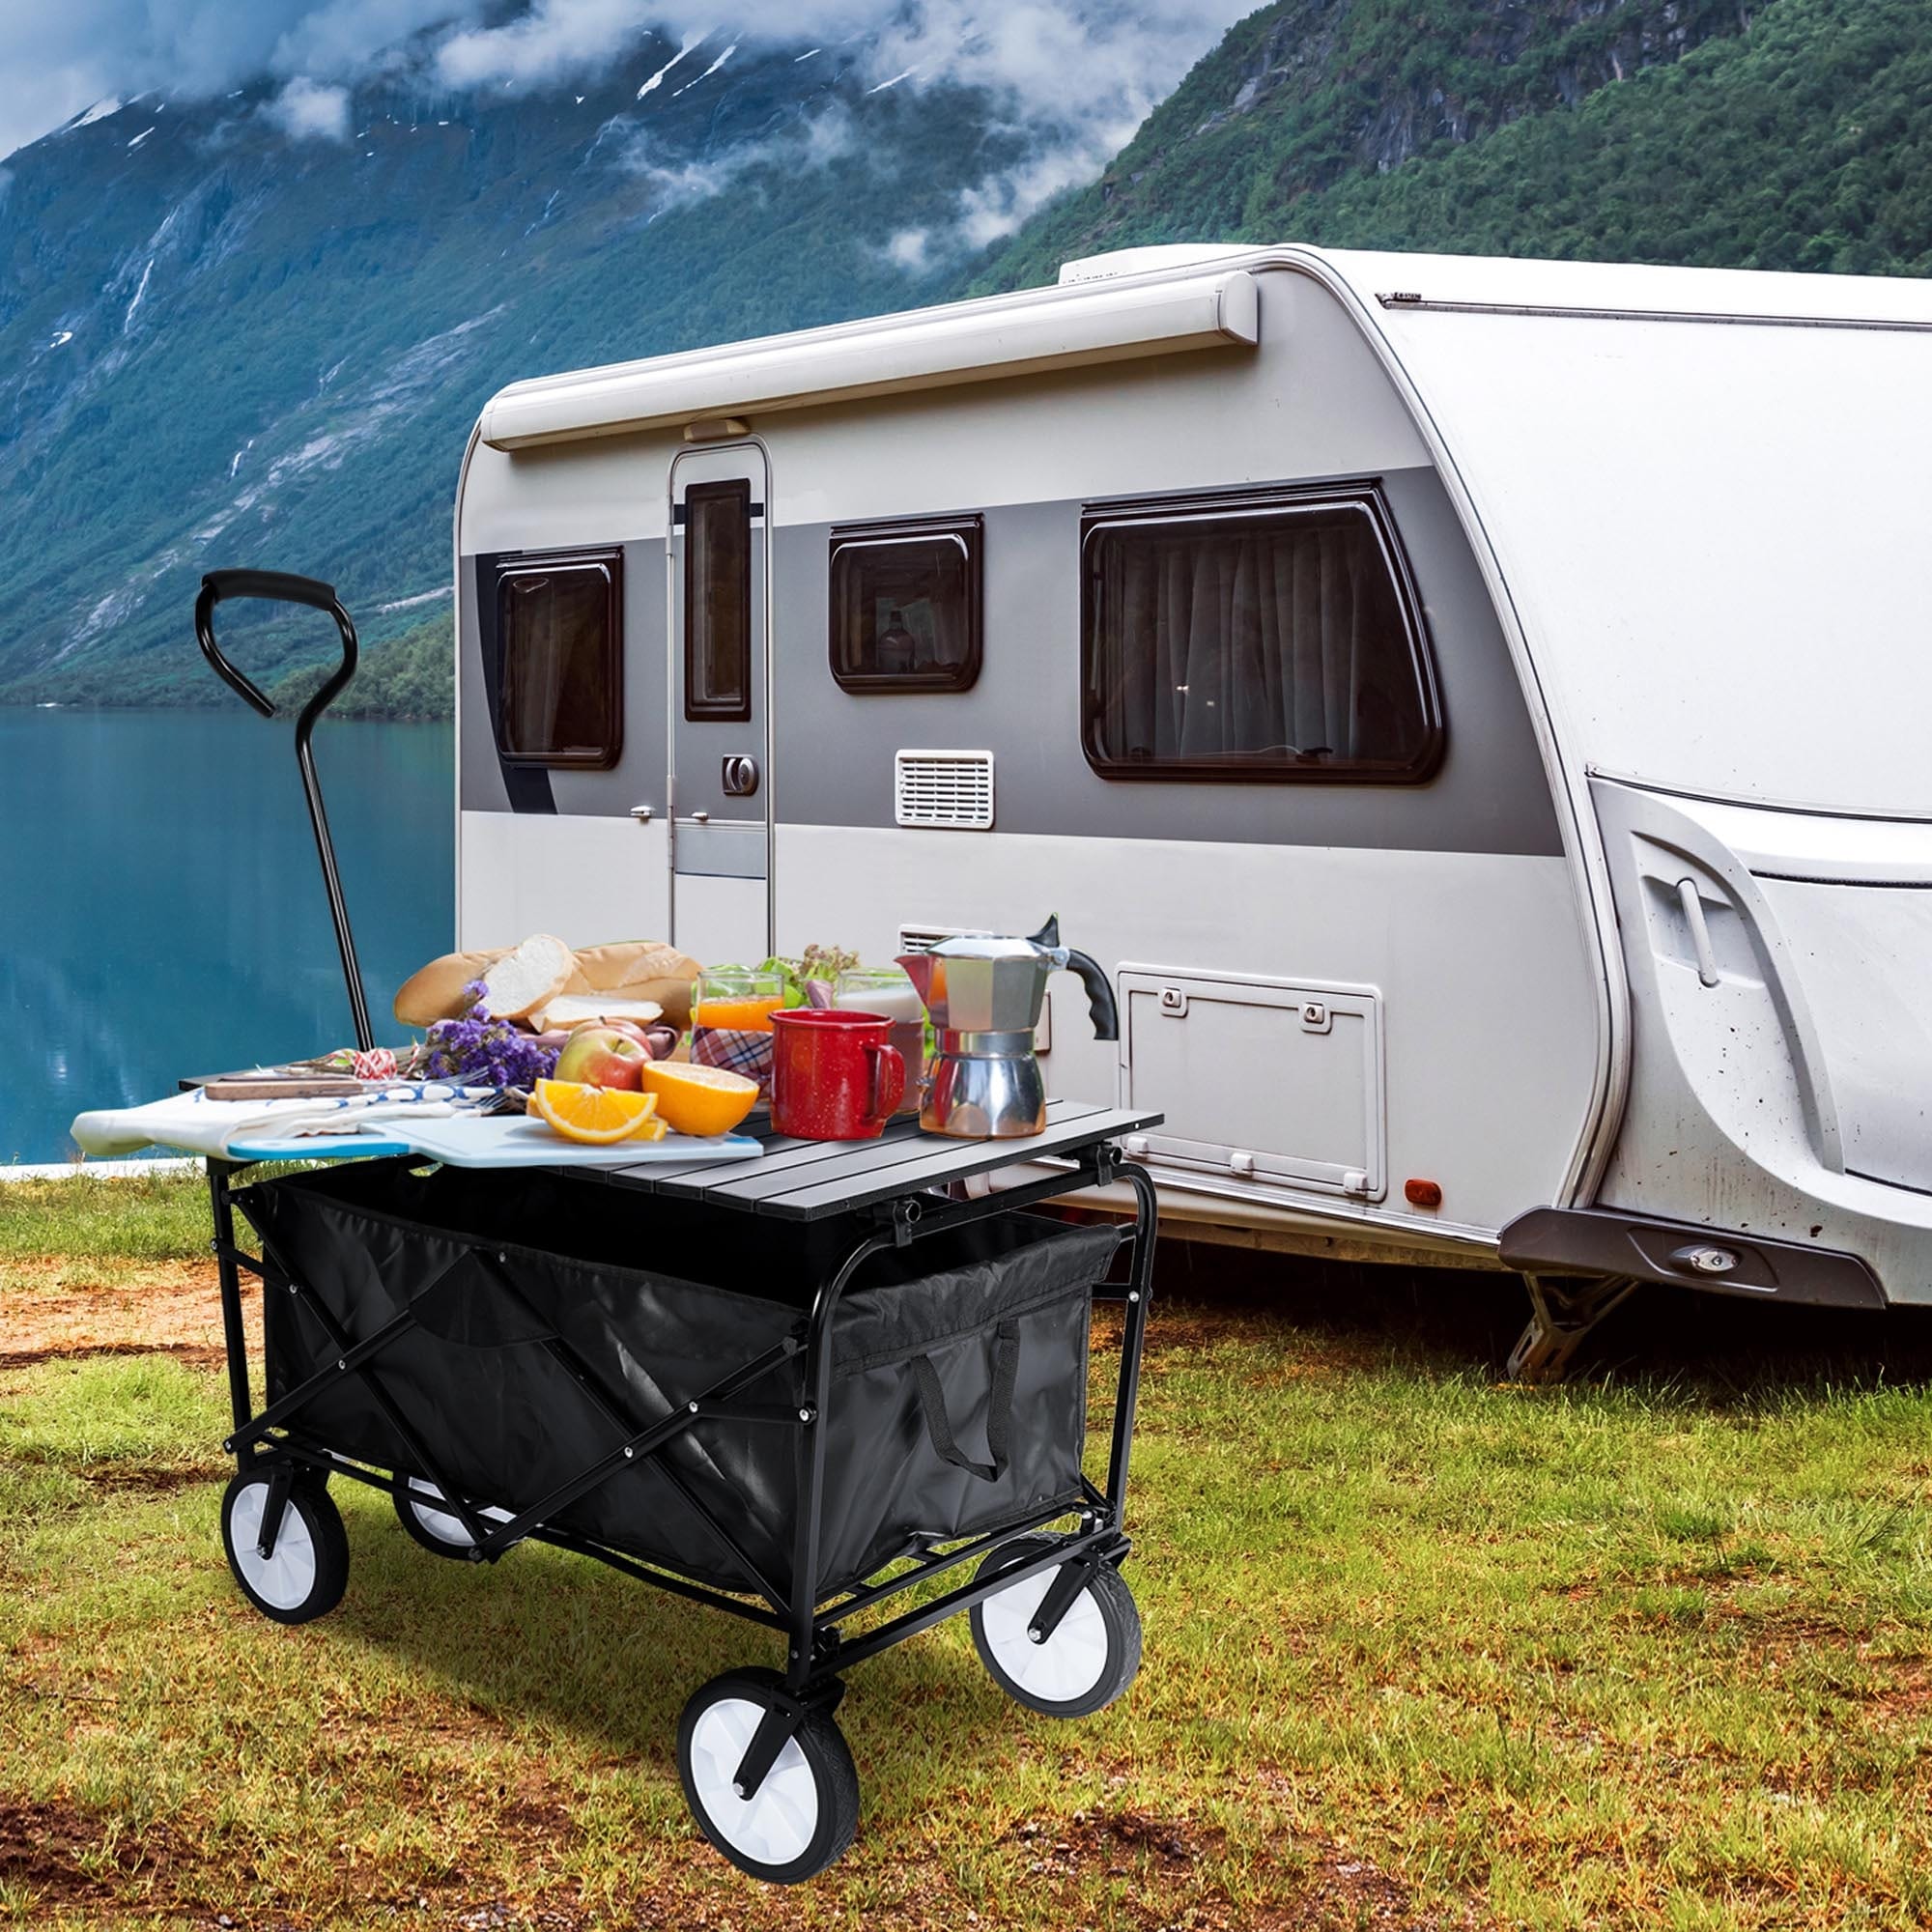 Outdoor Portable Folding Wagon/Camping Cart and Collapsible Aluminum Alloy  Table Combo Utility On Sale Bed Bath  Beyond 37999960